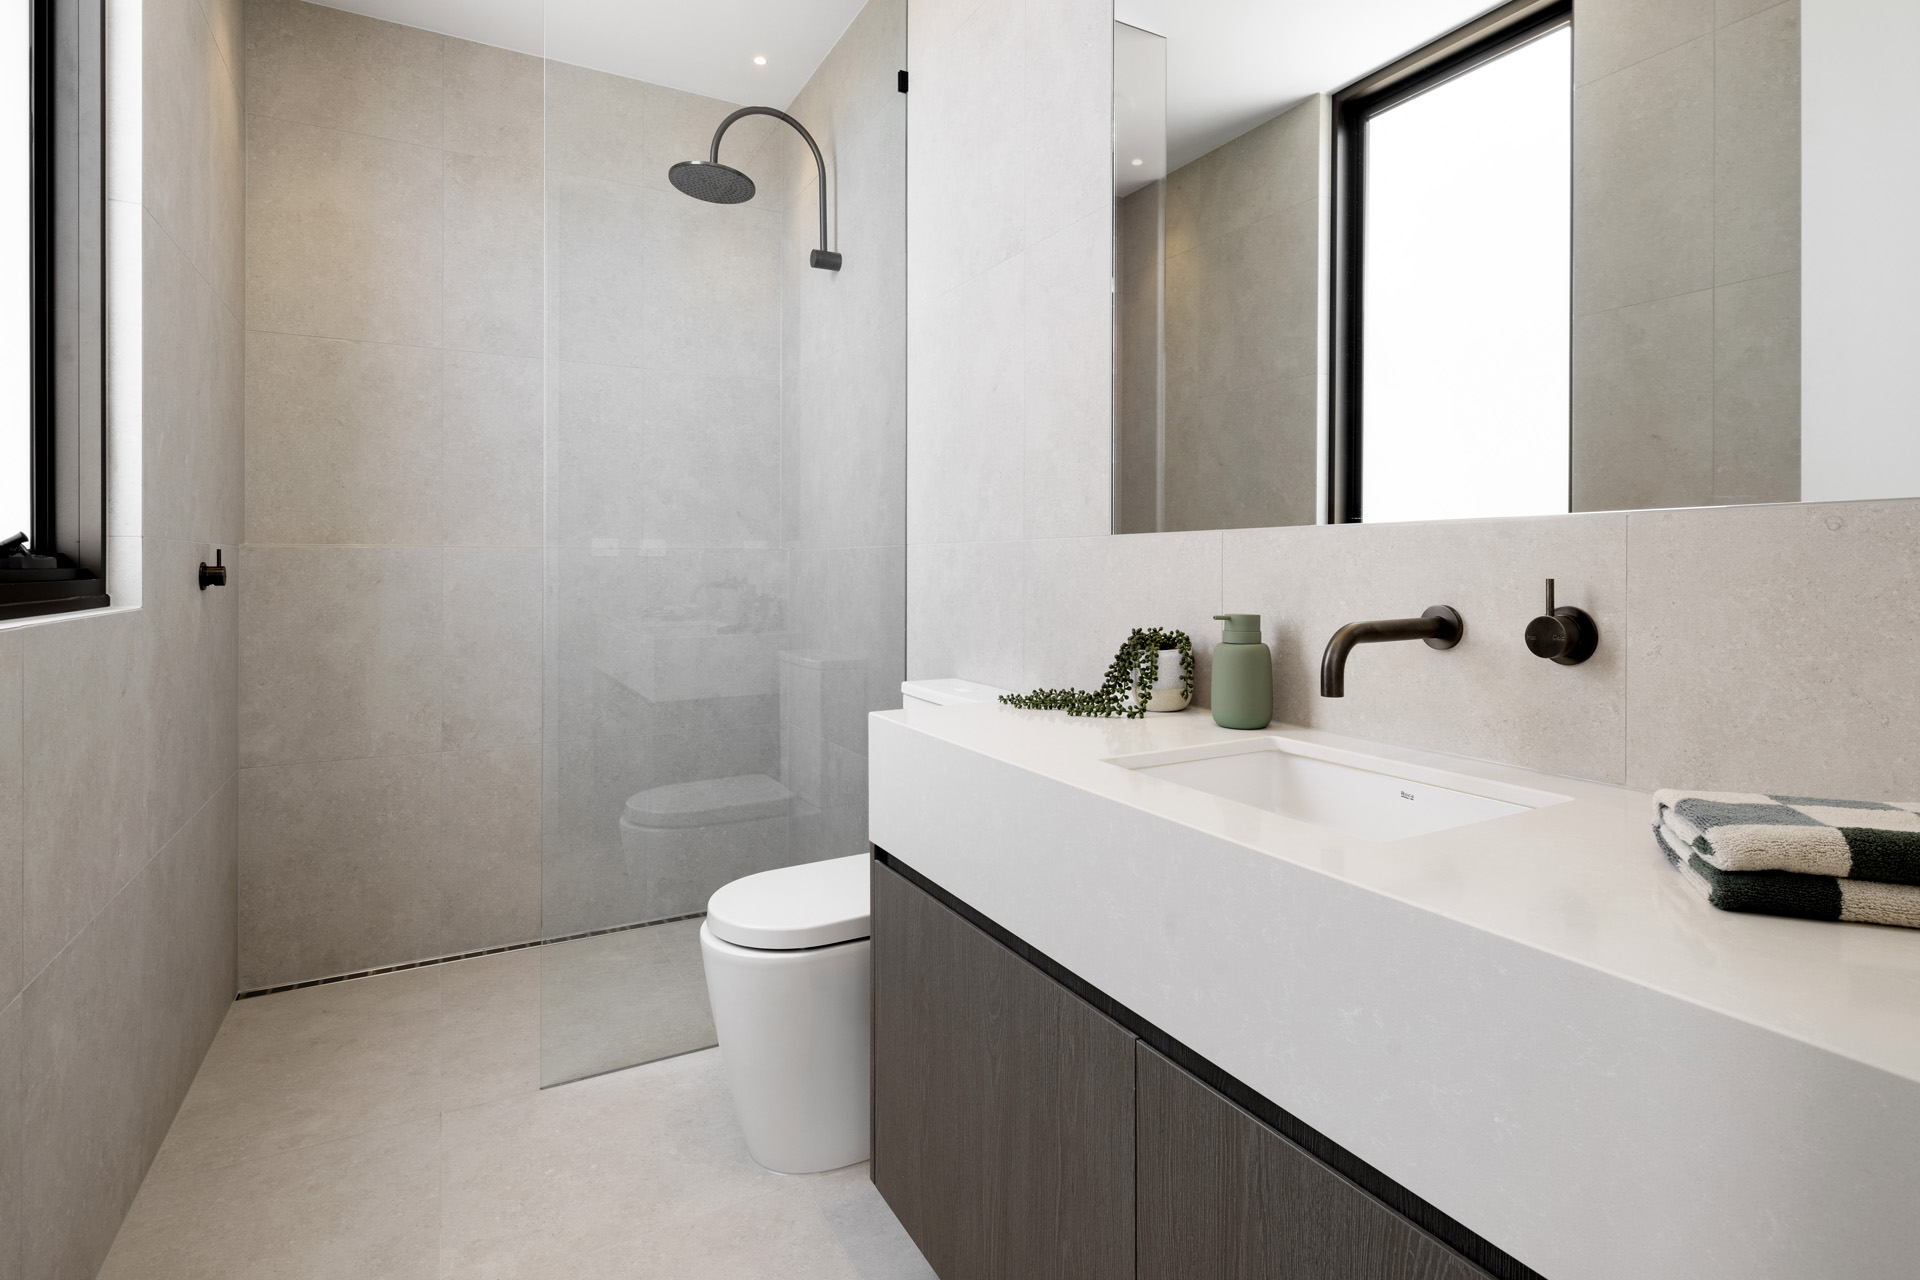 An image of the ensuite featuring built in basin and cabinetry with a large rectangular wall mirror